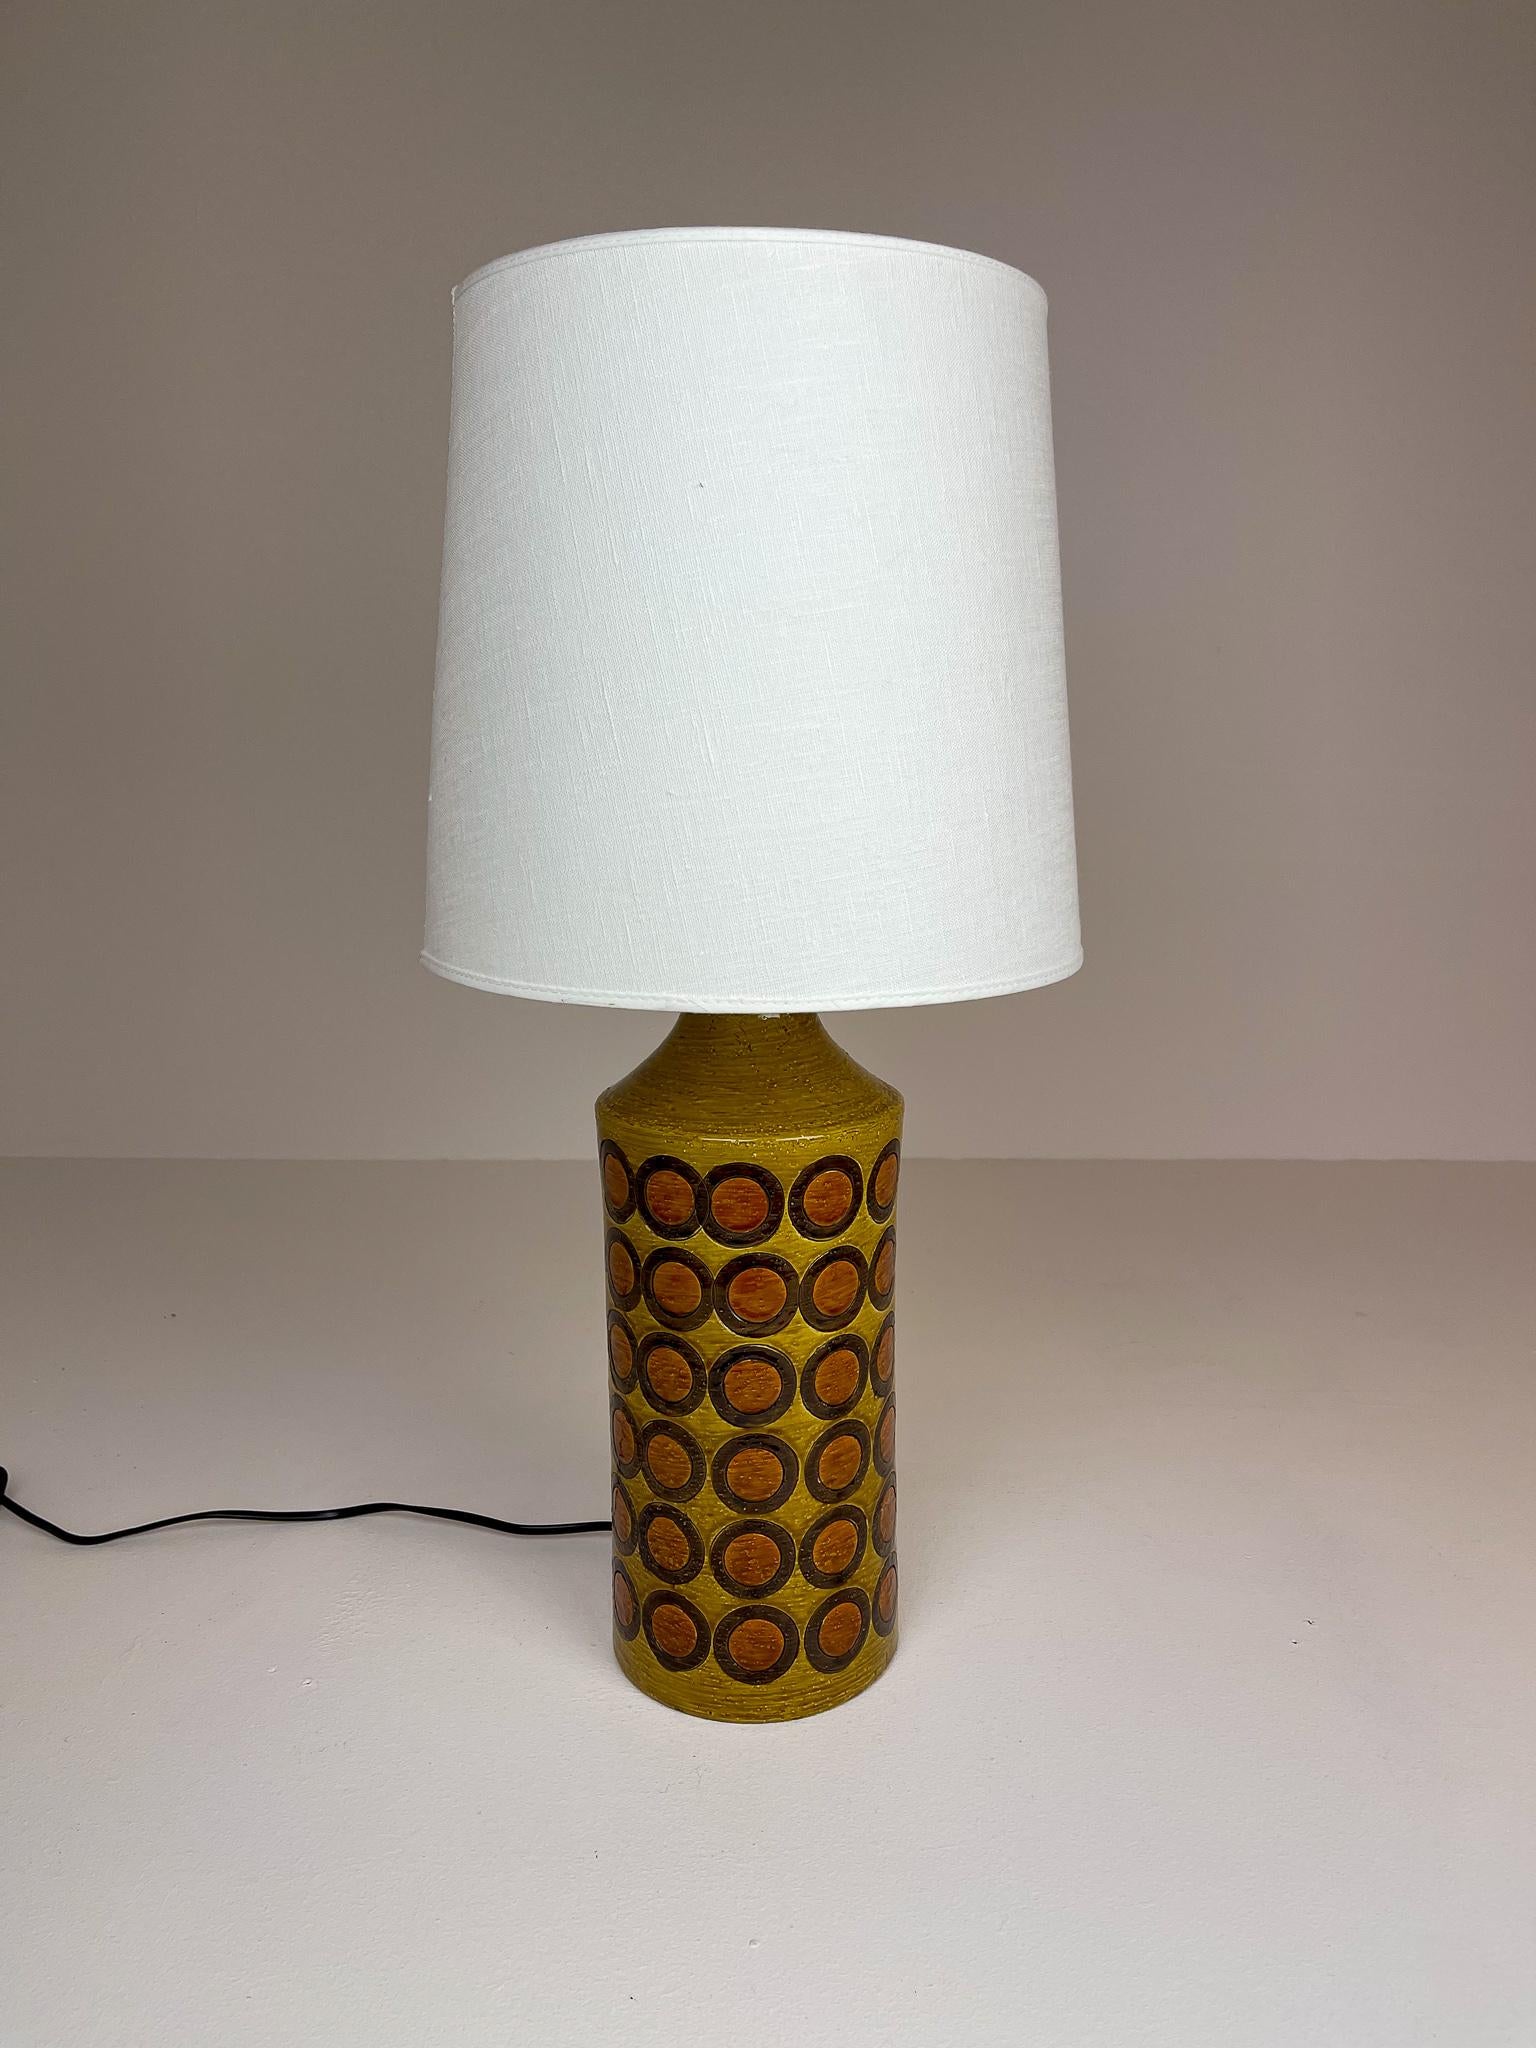 This ceramic table lamp was produced by Bitossi Italy for Bergboms lamp factory in Sweden, The iconic look of a table lamp from the late 1960s early 70s. 

Good vintage condition.

Dimensions: H 42 cm D 14 cm with shade H 62 cm.

 
 